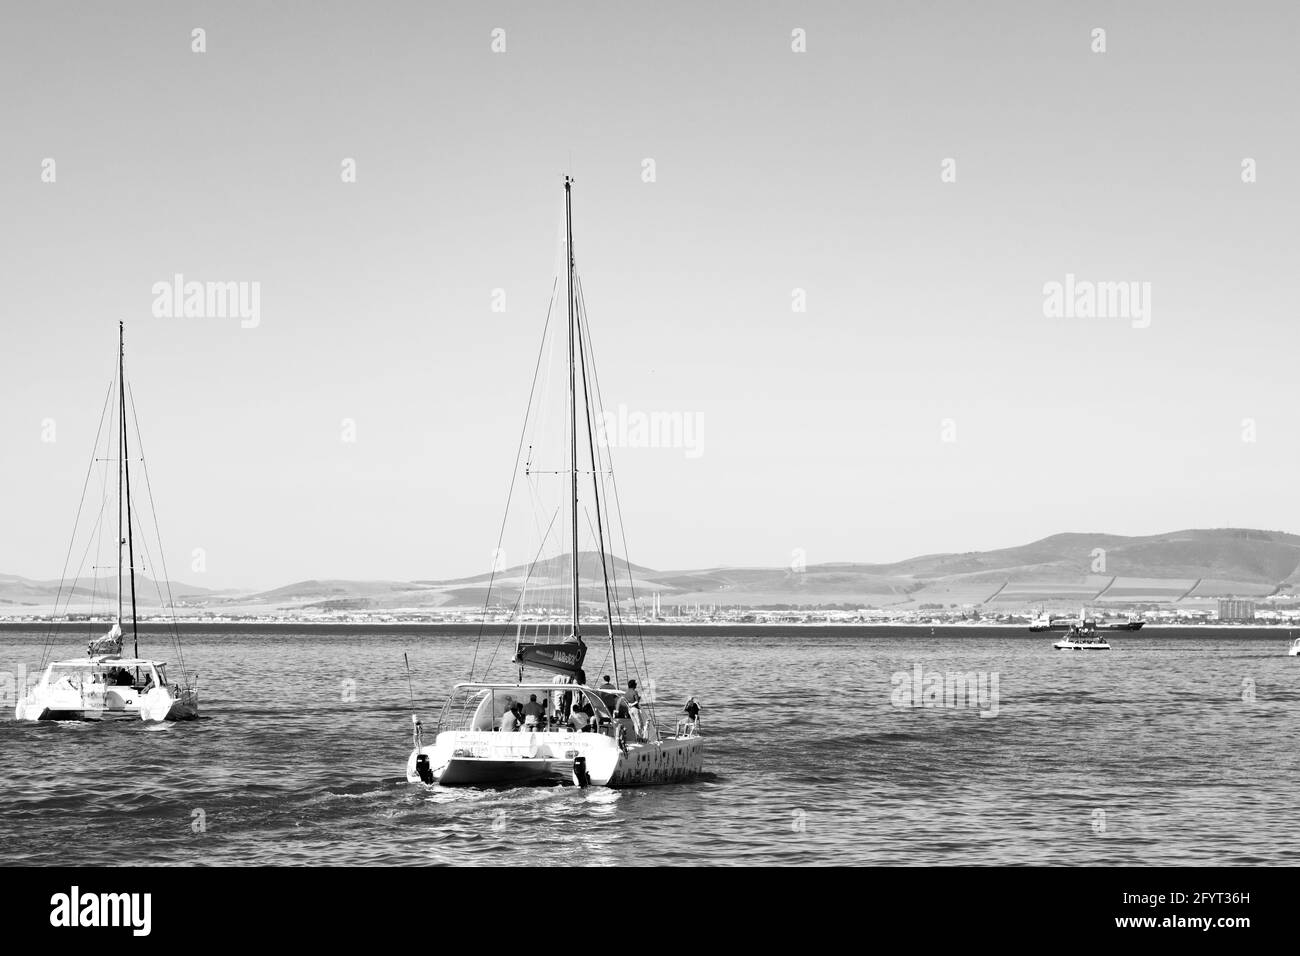 CAPE TOWN, SOUTH AFRICA - Jan 06, 2021: Cape Town, South Africa - October 13, 2019: Tourists riding on catamaran yacht outside harbor port of Cape Tow Stock Photo